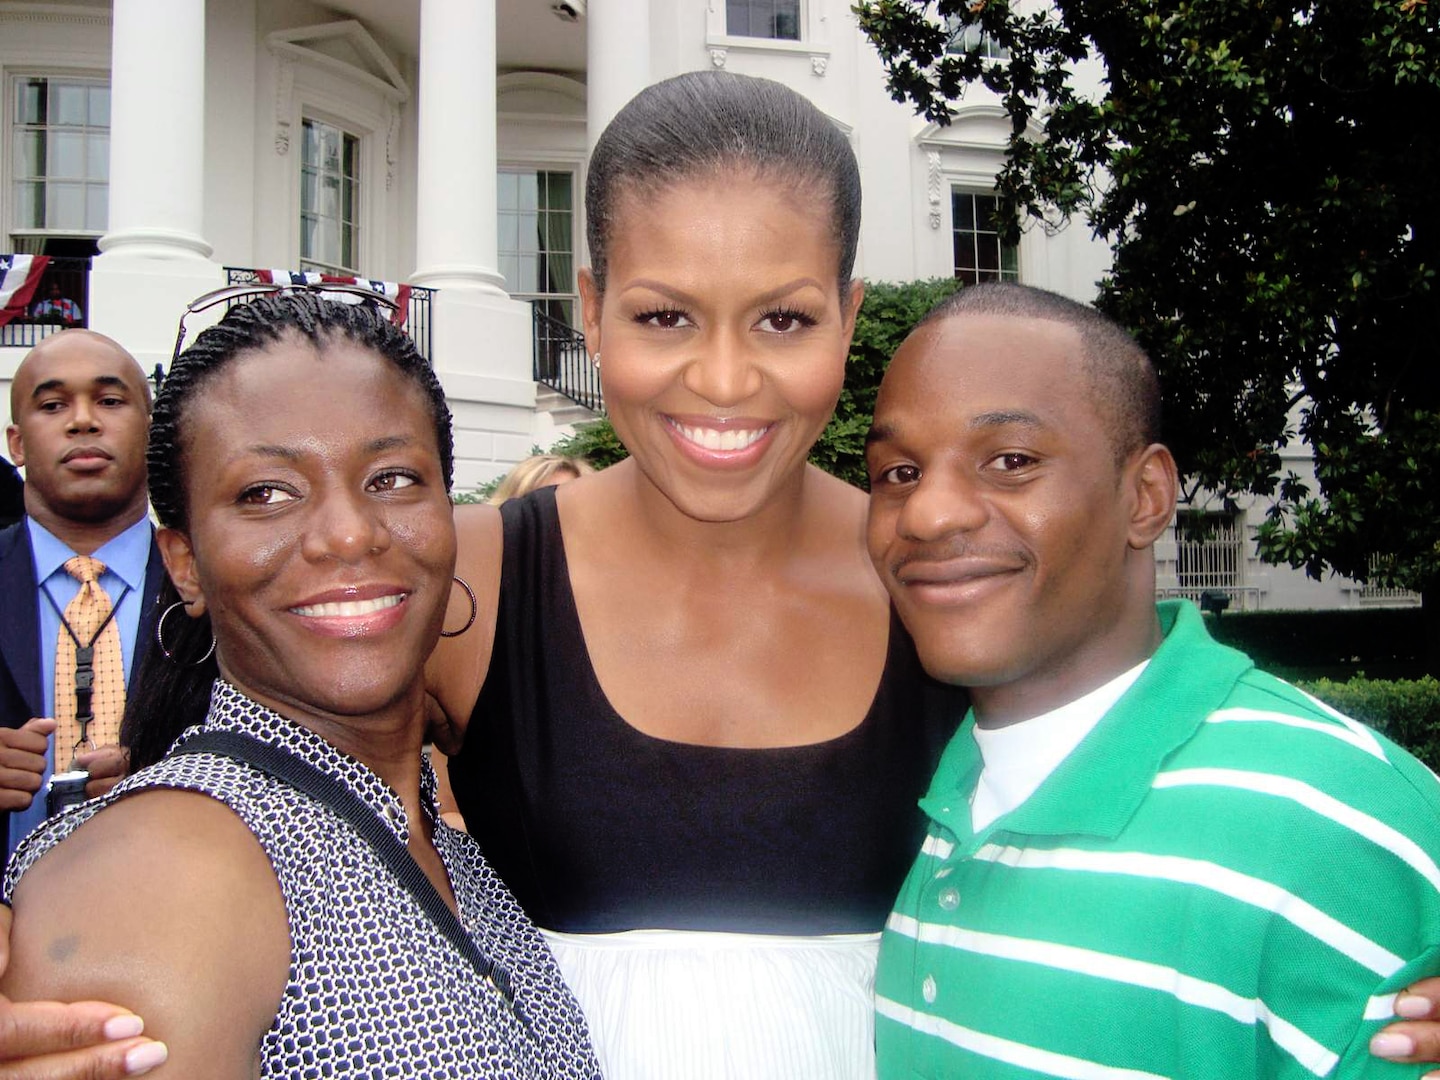 Senior Airman Duane Dunlap (right) and Staff Sgt. Theda Franklin (left) visit with First Lady Michelle Obama at the White House during a Salute to the Military event on the Fourth of July. Airman Dunlap is an Air Force wounded warrior who was chosen to attend the event that included dinner, fireworks and a chance to meet the president and first lady. Sergeant Franklin is assigned to the 59th Medical Wing at Lackland Air Force Base, Texas. (U.S. Air Force photo) 
